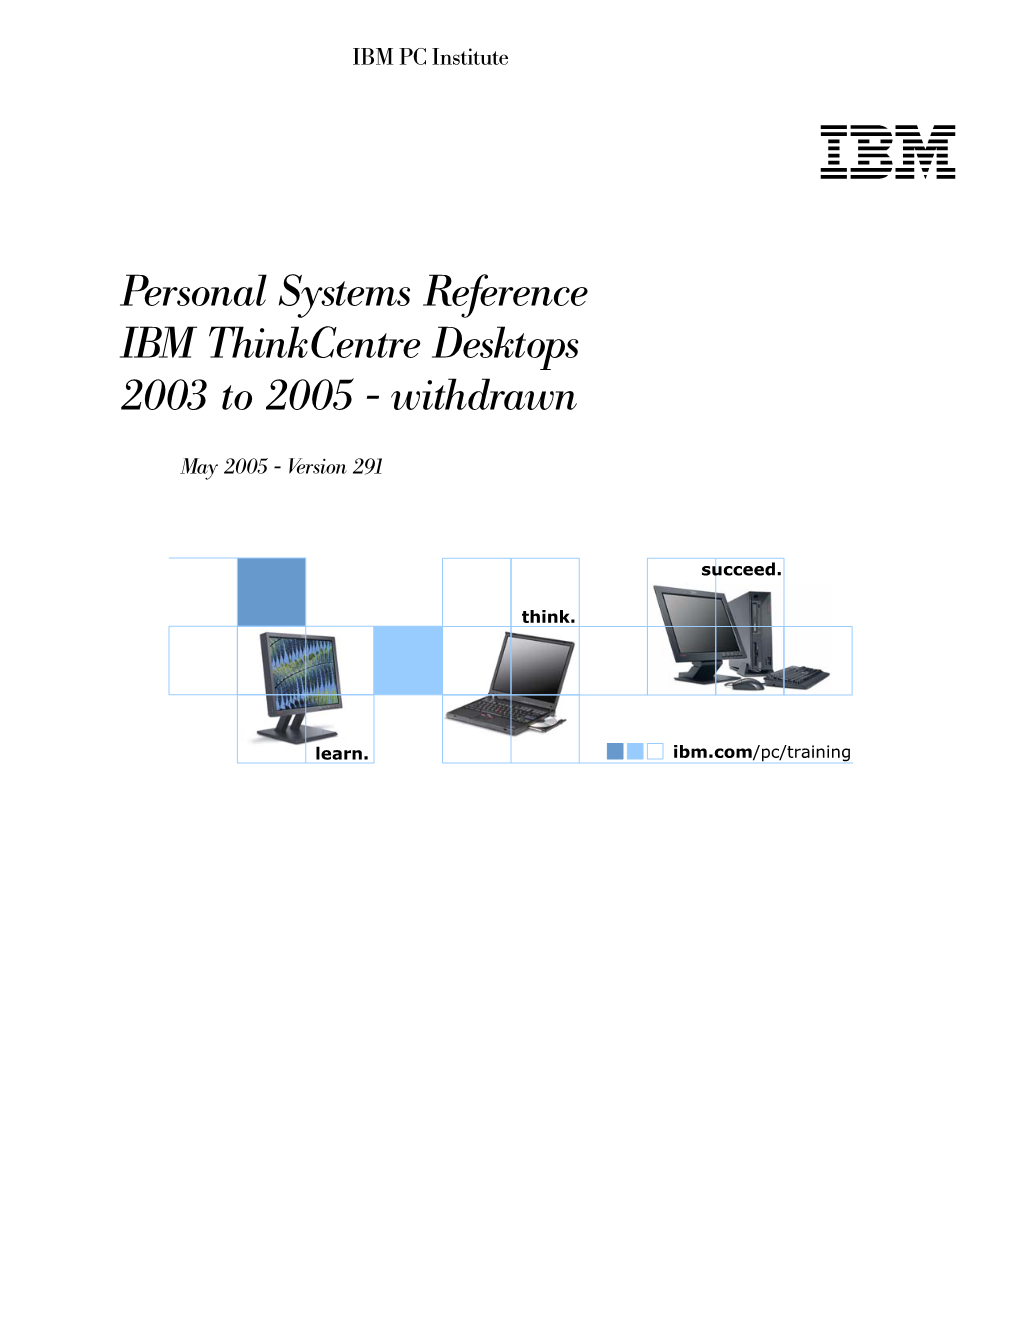 Personal Systems Reference IBM Thinkcentre Desktops 2003 to 2005 - Withdrawn